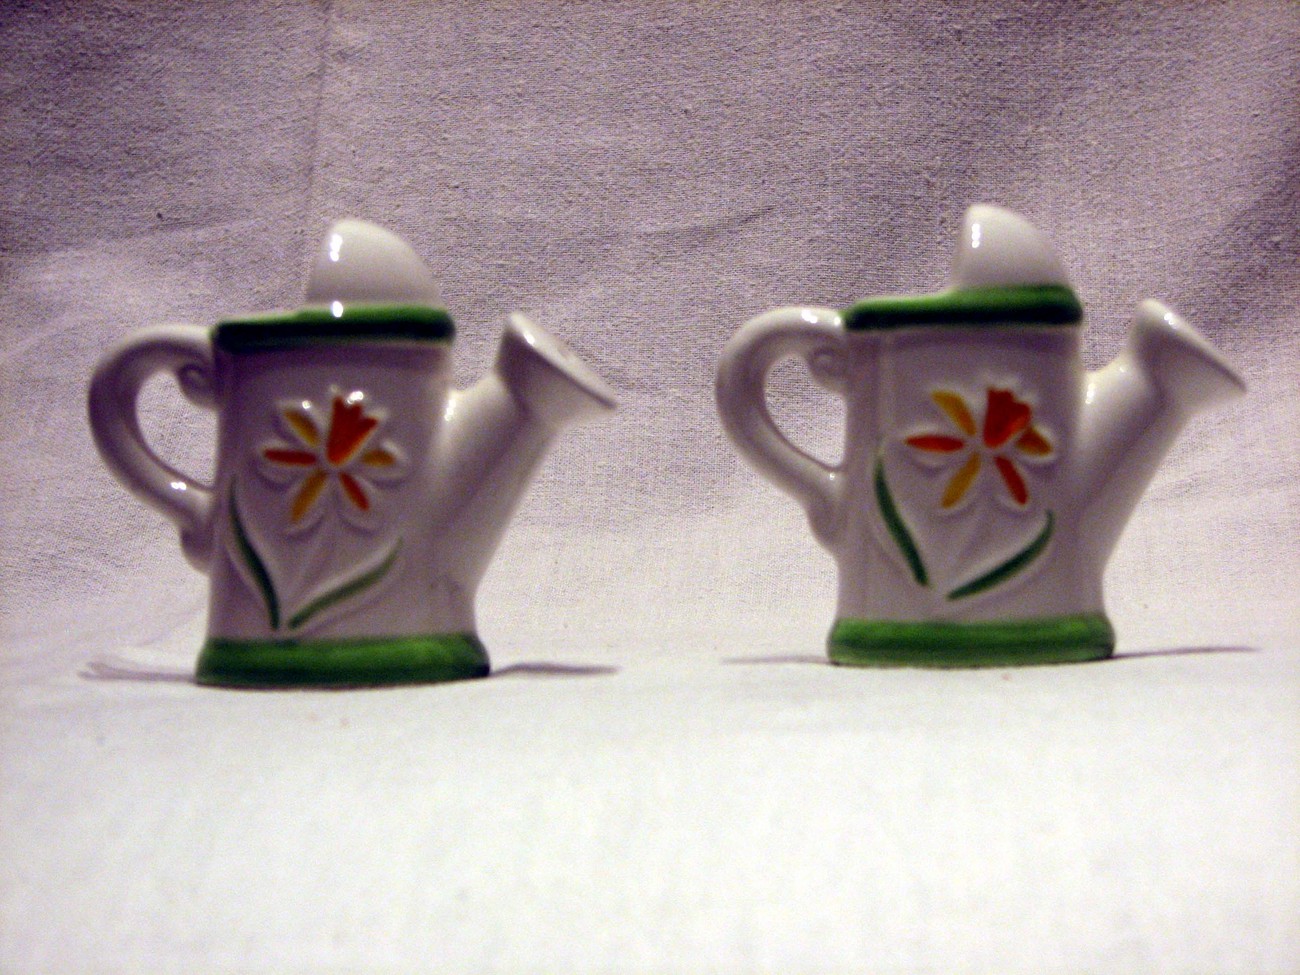 White Watering Can Salt and Pepper Shakers  - $6.00